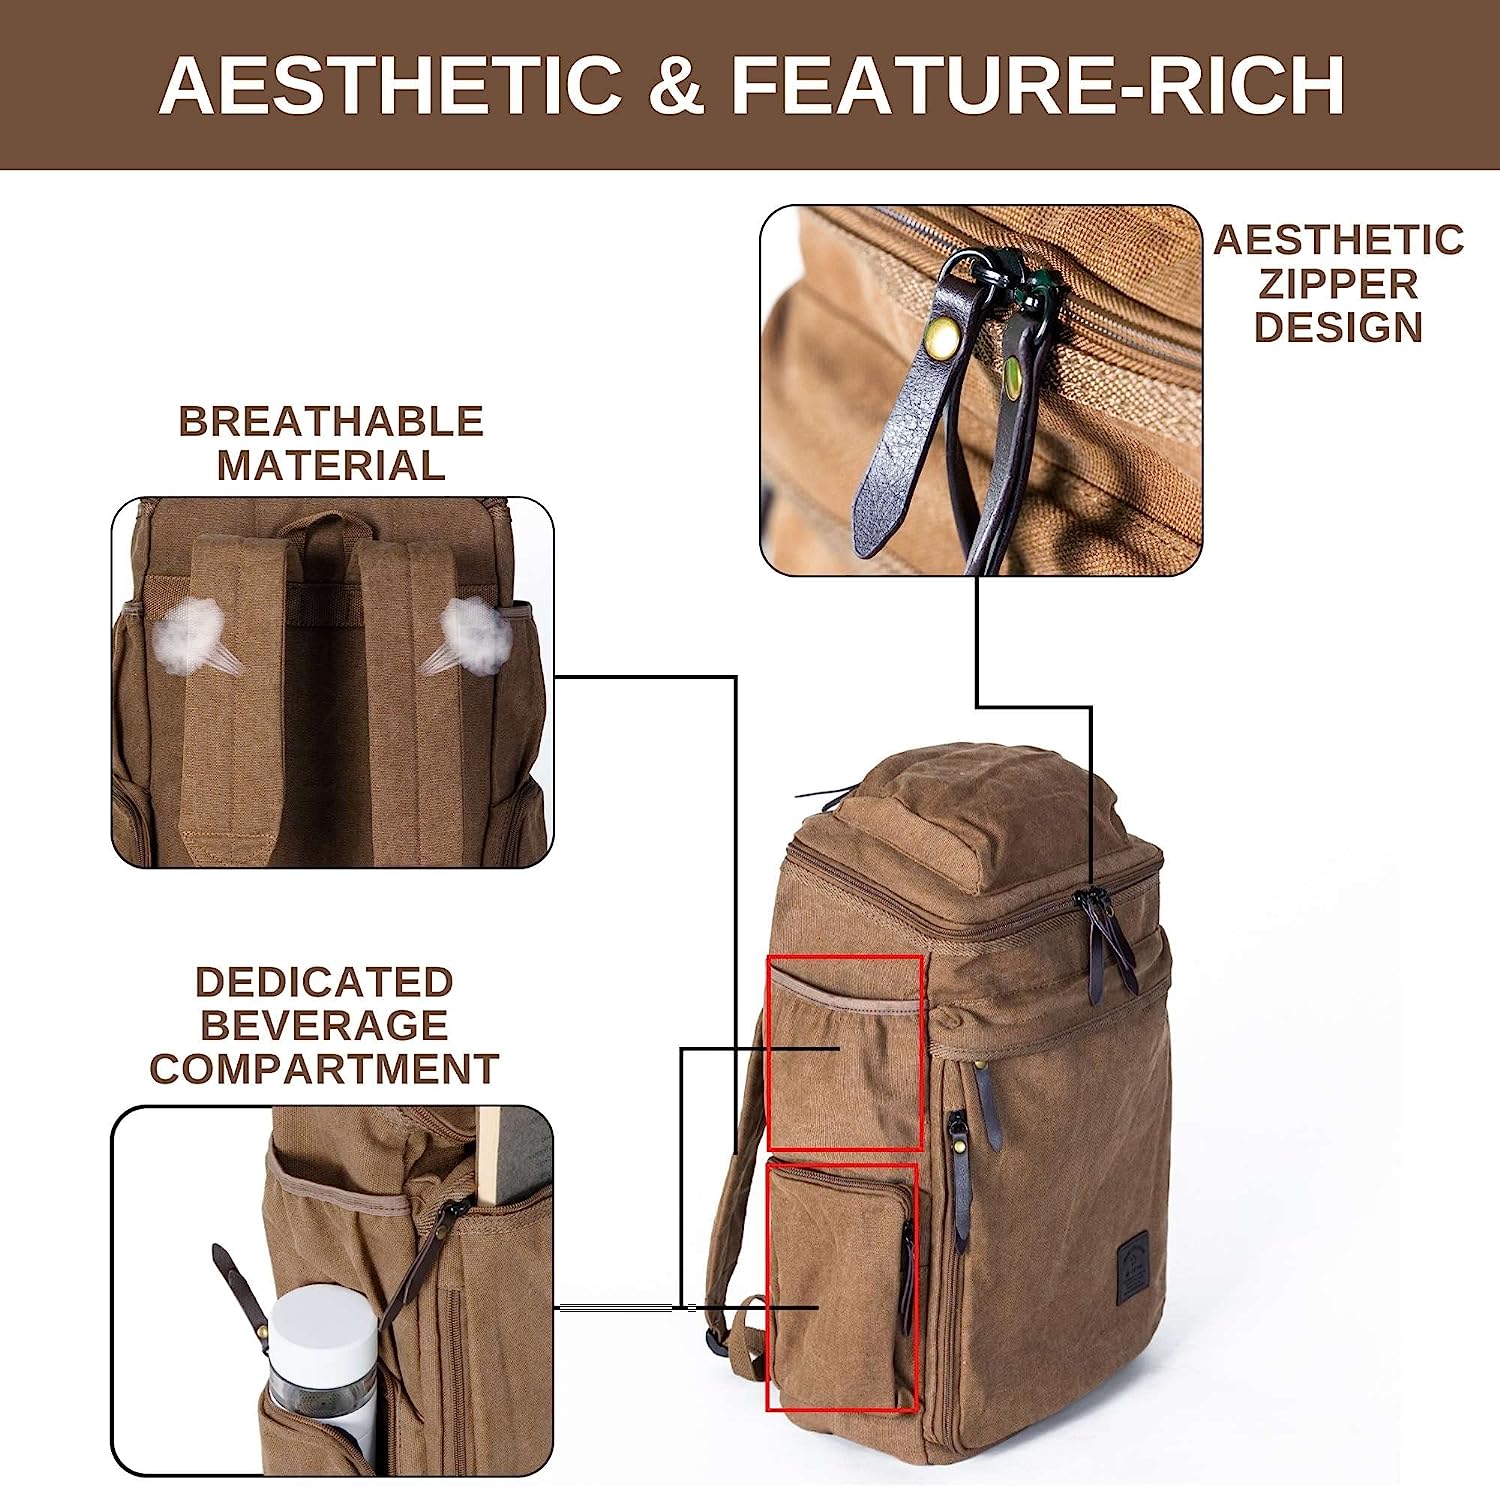 Casual canvas backpack